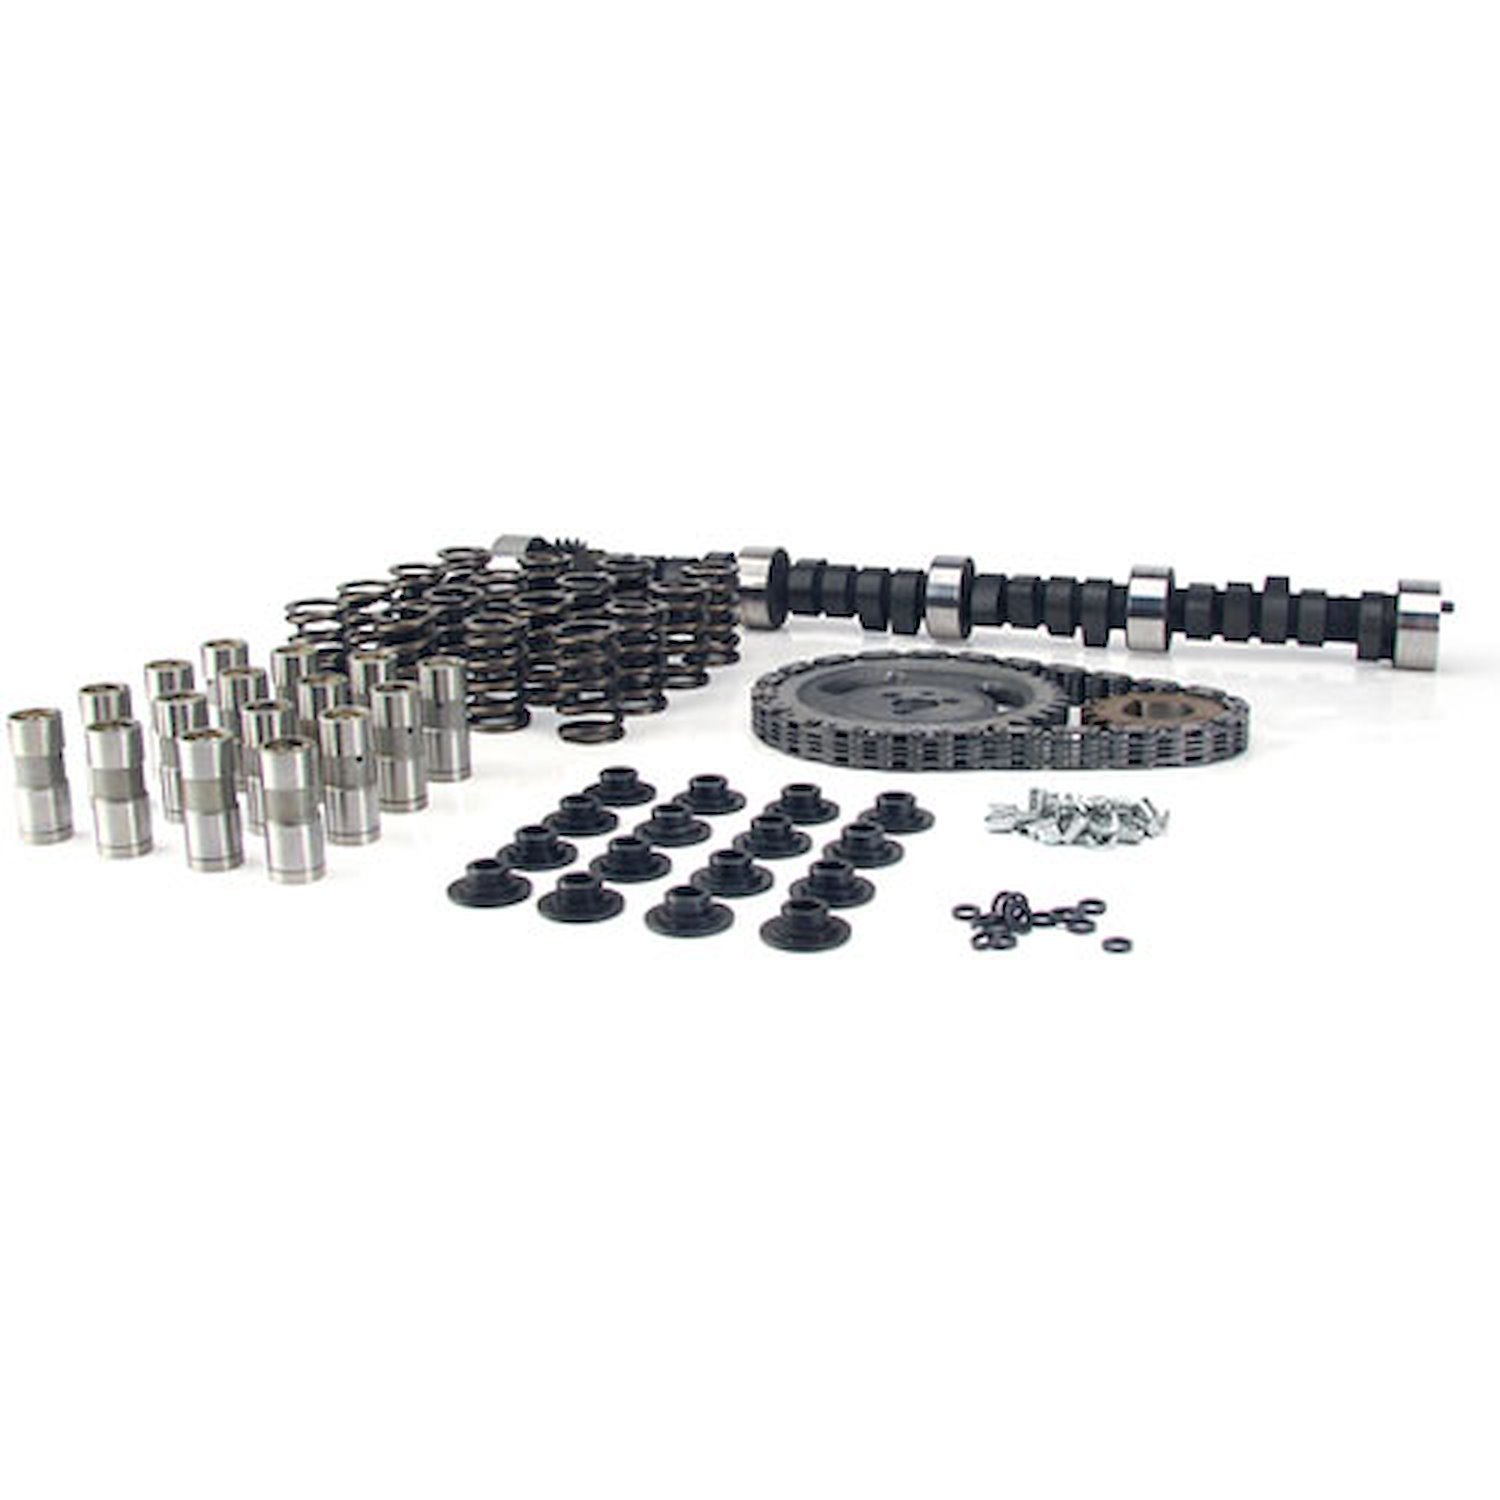 Xtreme Energy 262H Hydraulic Flat Tappet Camshaft Complete Kit Lift: .462"/.469" Duration: 262°/270° RPM Range: 1300-5600